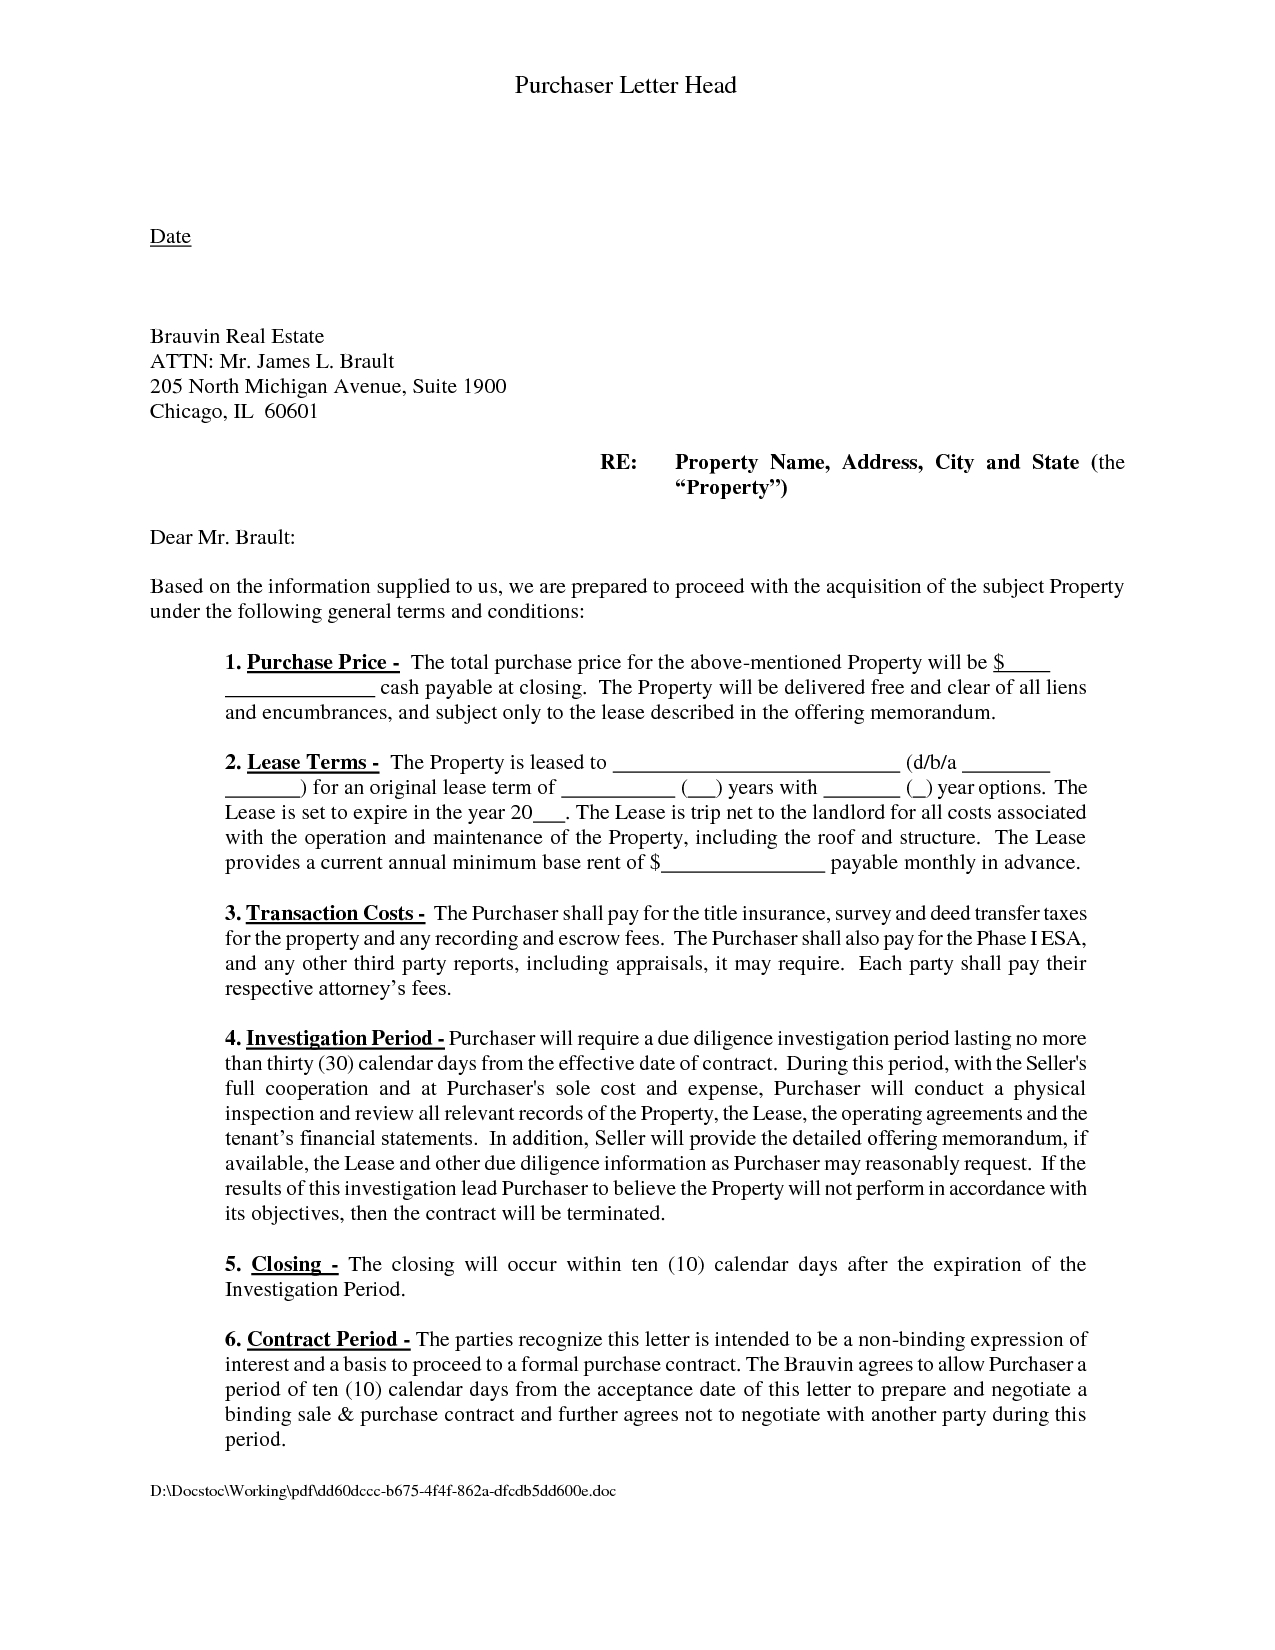 Commercial Real Estate Letter Of Intent to Purchase Template - Mercial Letter Intent Template to Lease Space Real Estate